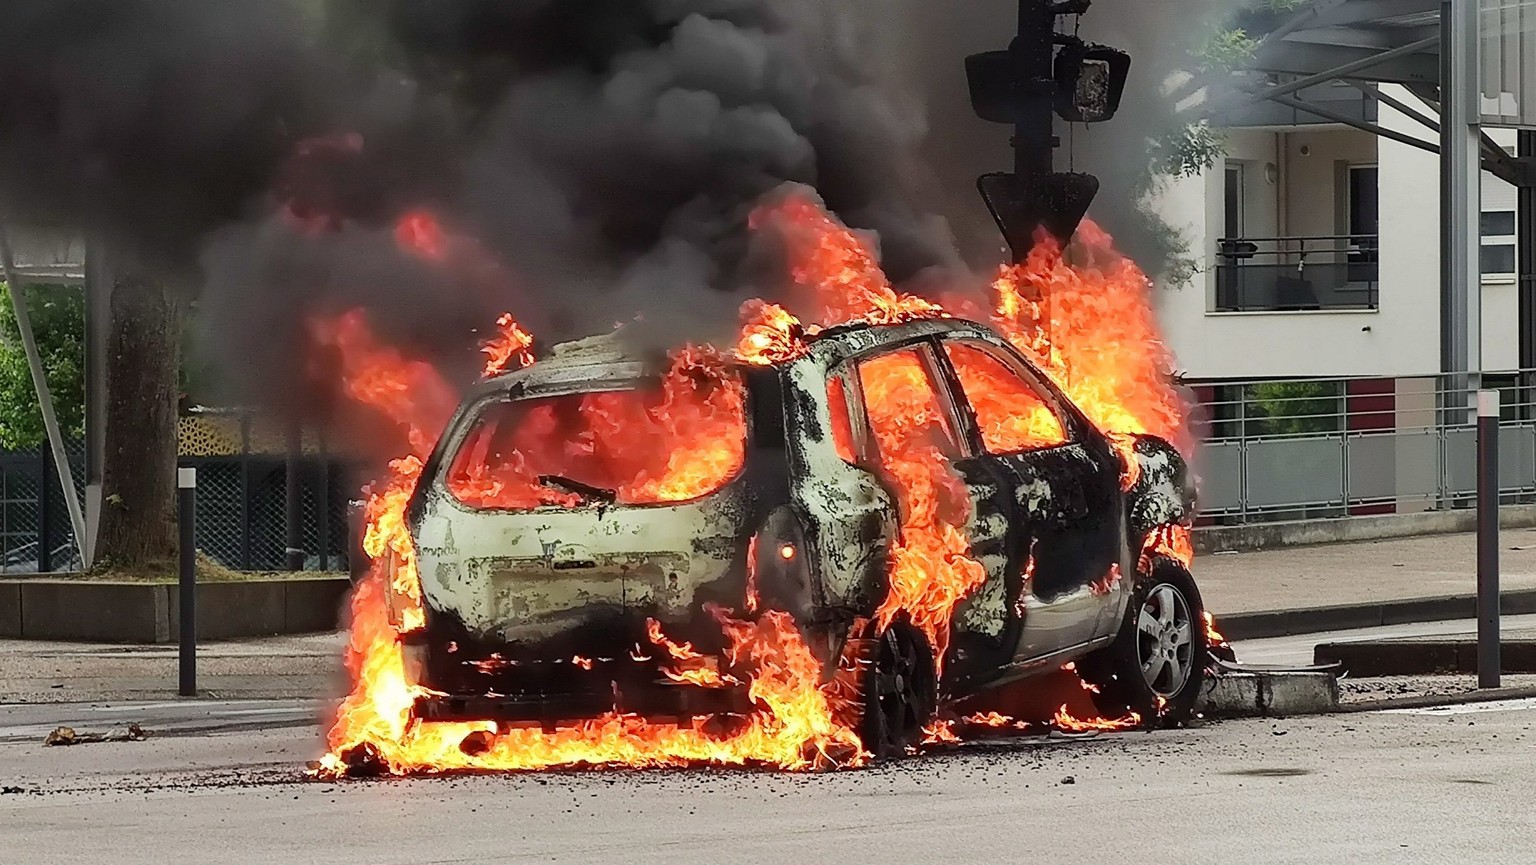 epa08487978 A car burns after scenes of violence in the Gresilles neighborhood in Dijon, France, 15 June 2020 (issued 16 June 2020). Members of the Chechen community gathered in Dijon to avenge one of ...